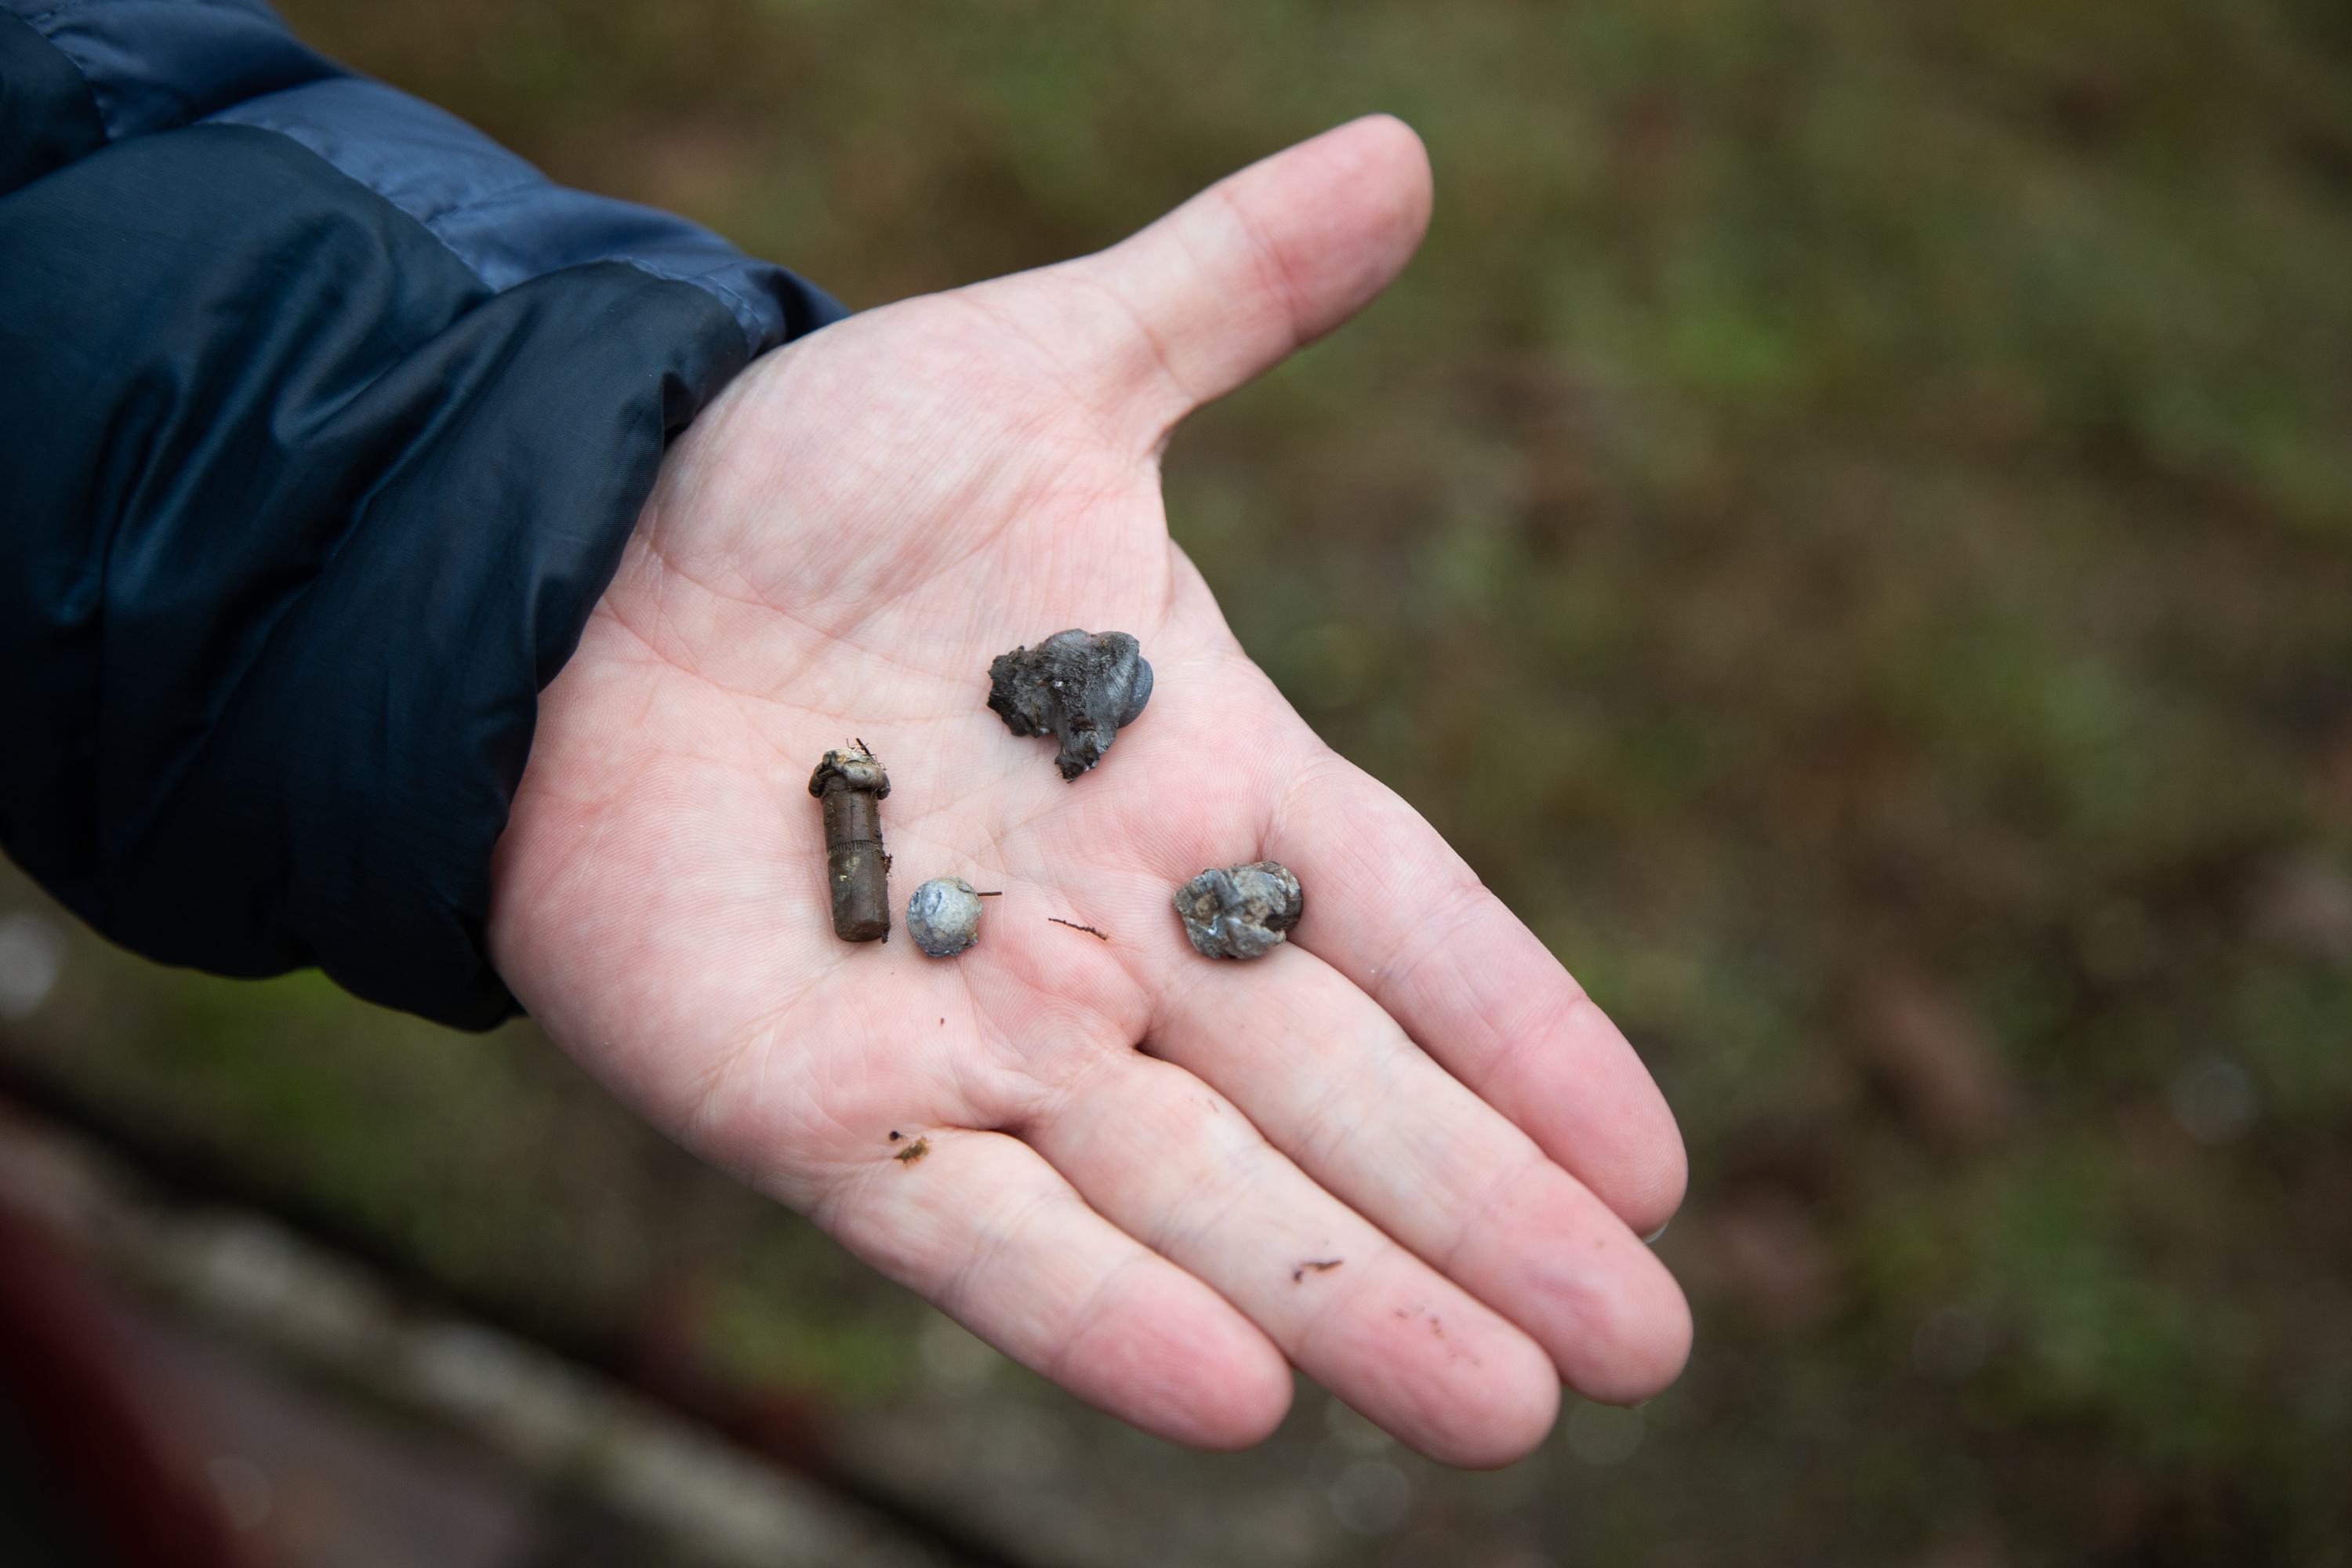 Five decades of bullet fragments and casings litter the ground at Plantation Rifle Range in Whatcom County.